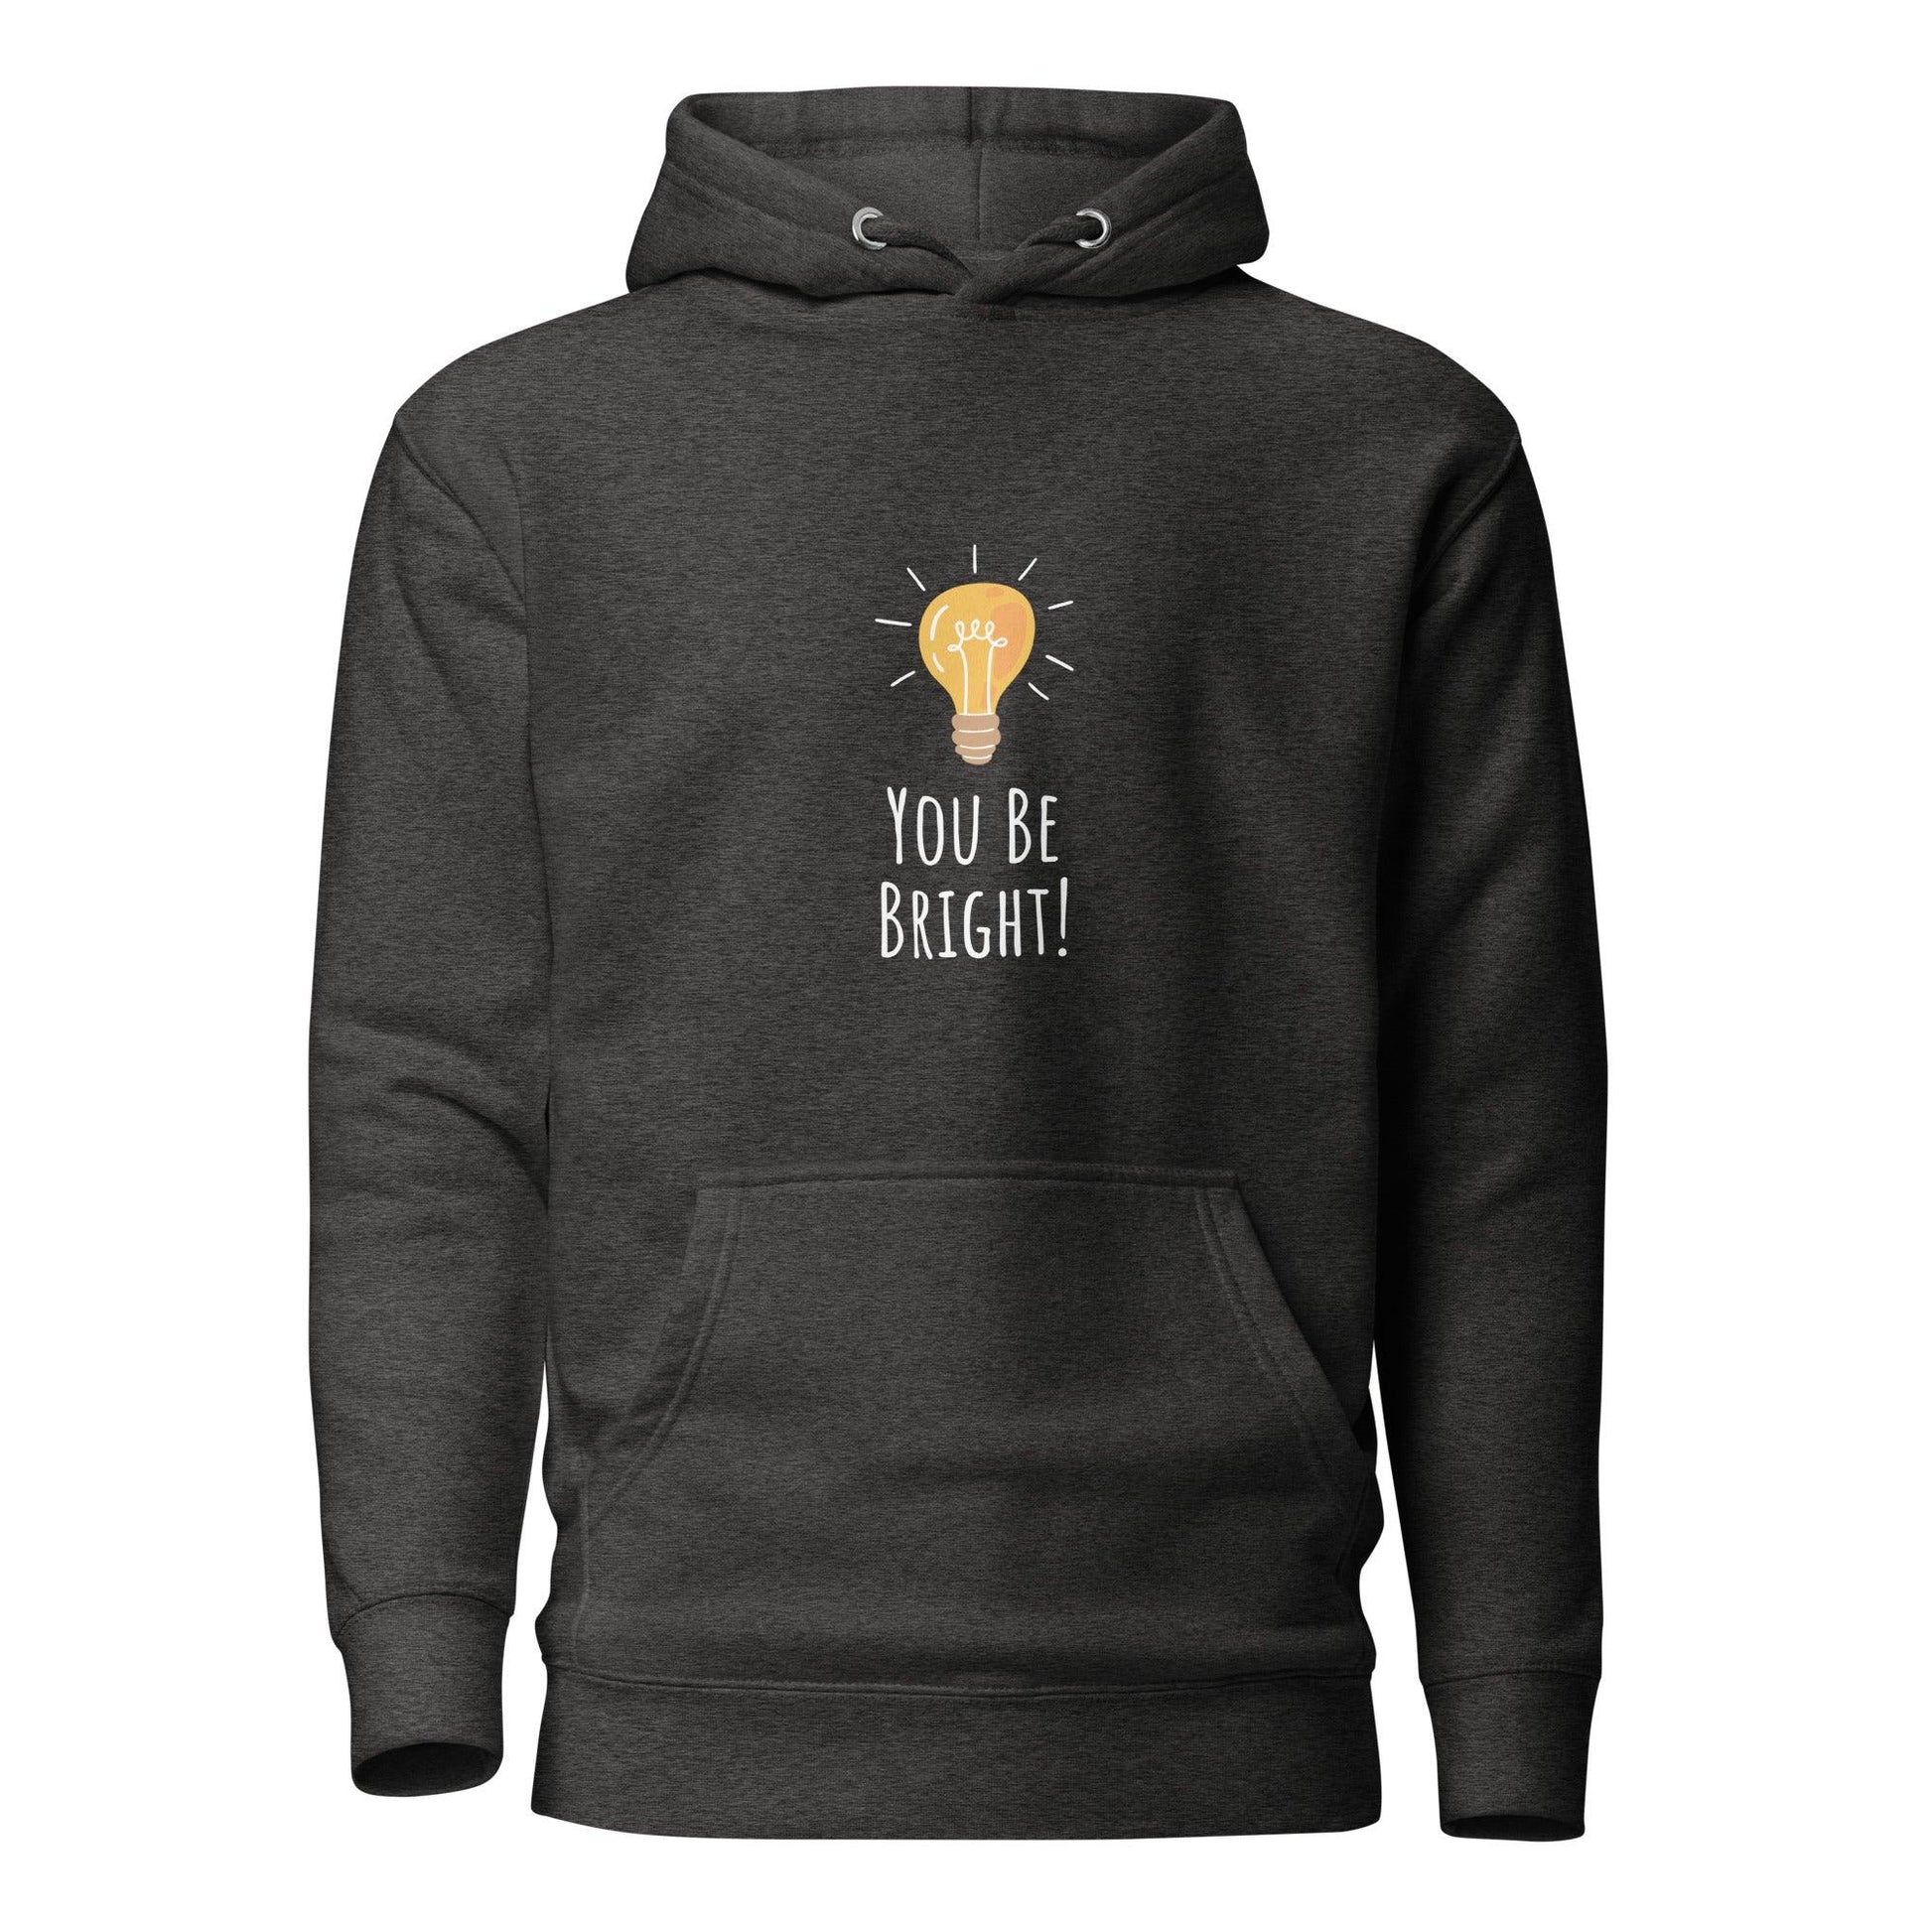 You Be Bright, Premium Unisex Hoodie | Positive Affirmation Clothing - Affirm Effect